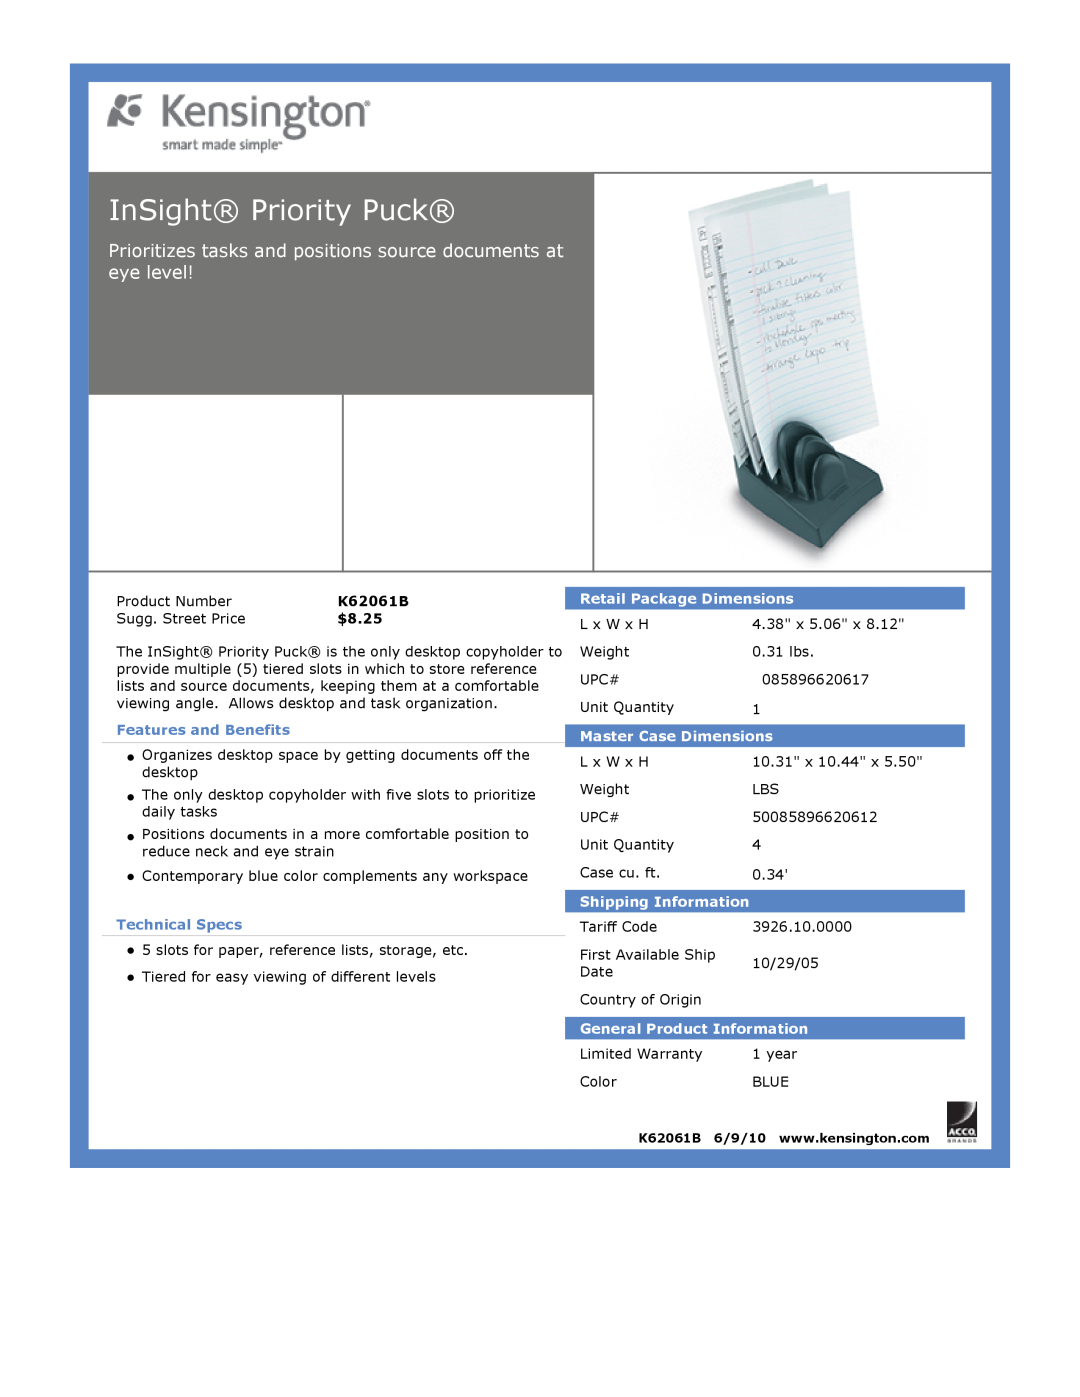 Kensington EU64325 InSight Priority Puck, $8.25, Features and Benefits, Technical Specs, Retail Package Dimensions 